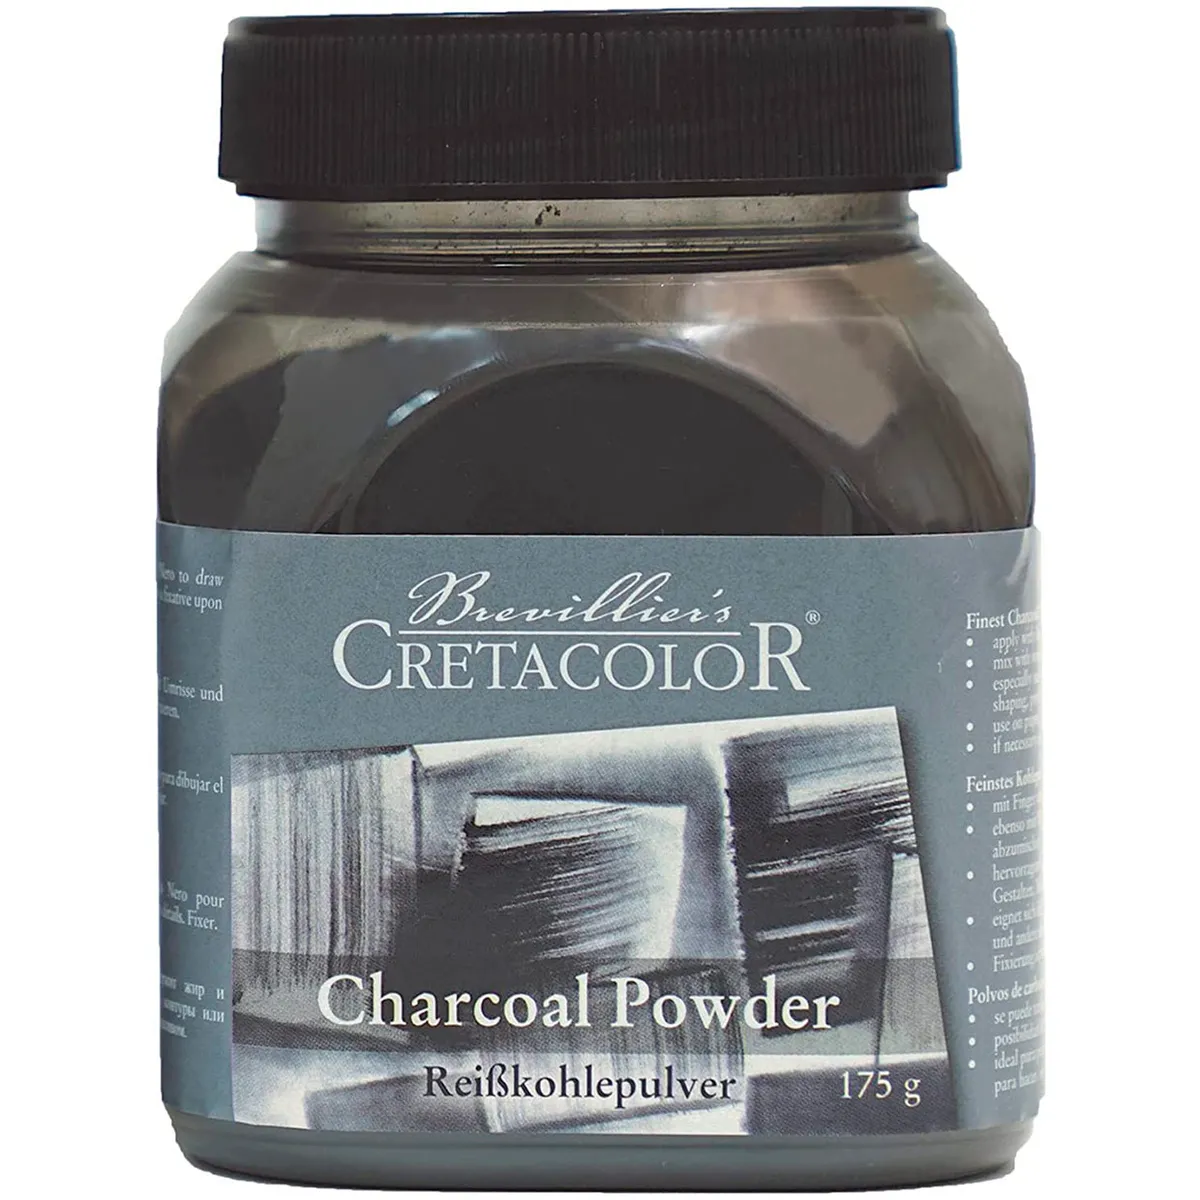 Charcoal drawing for beginners: how to create charcoal art - Gathered